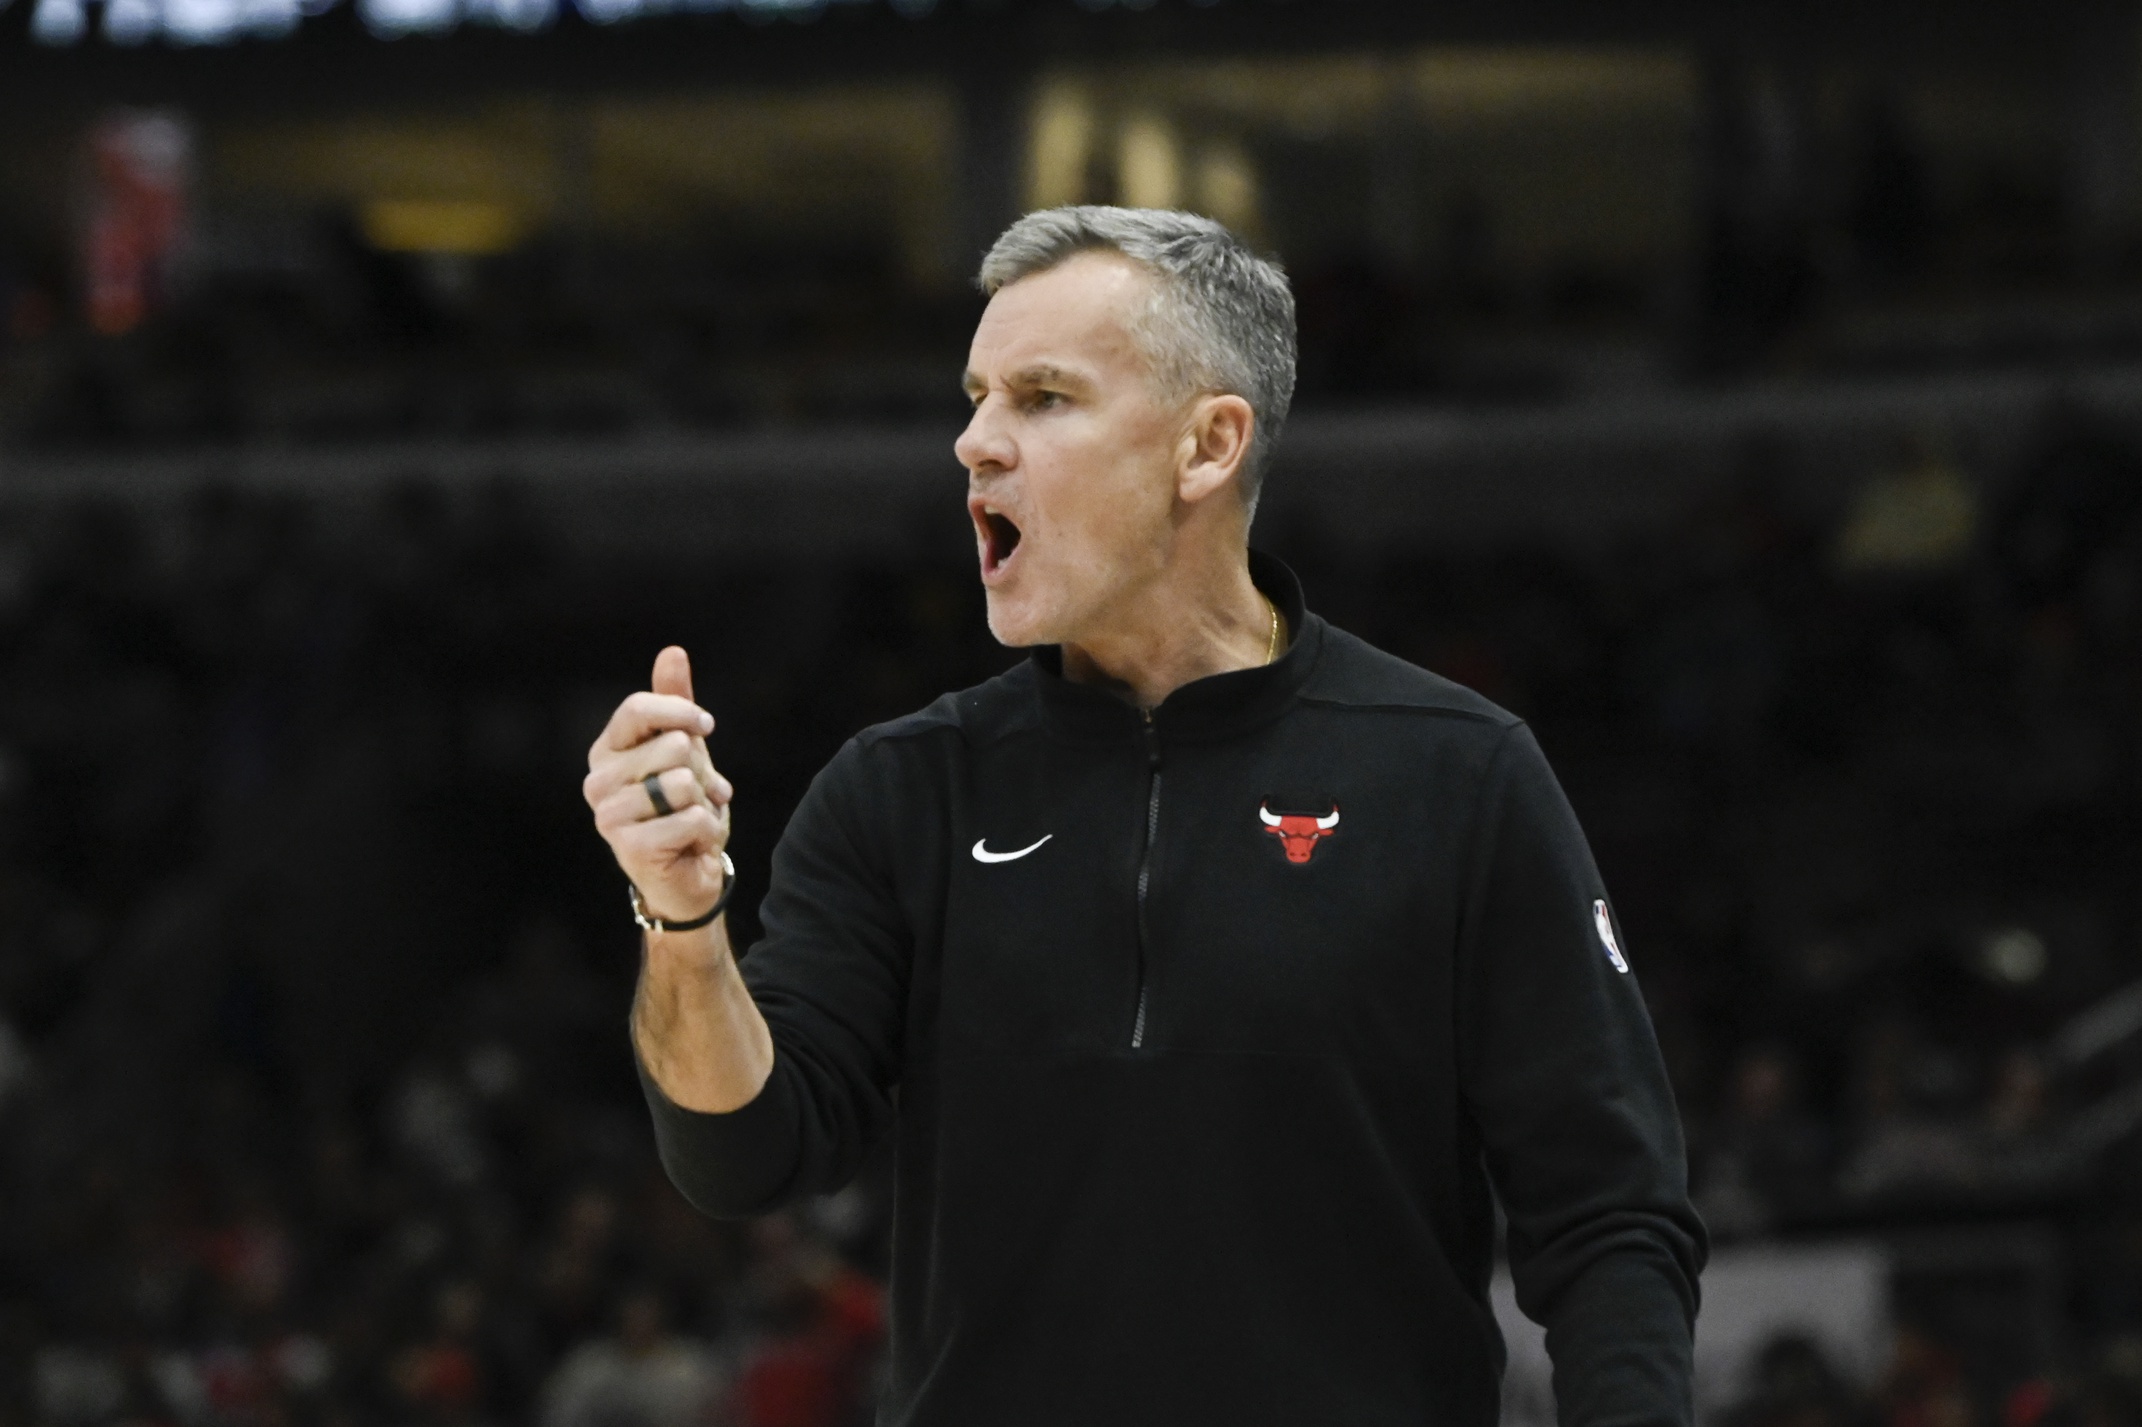 Billy Donovan and the Chicago Bulls are off to a very rocky start.